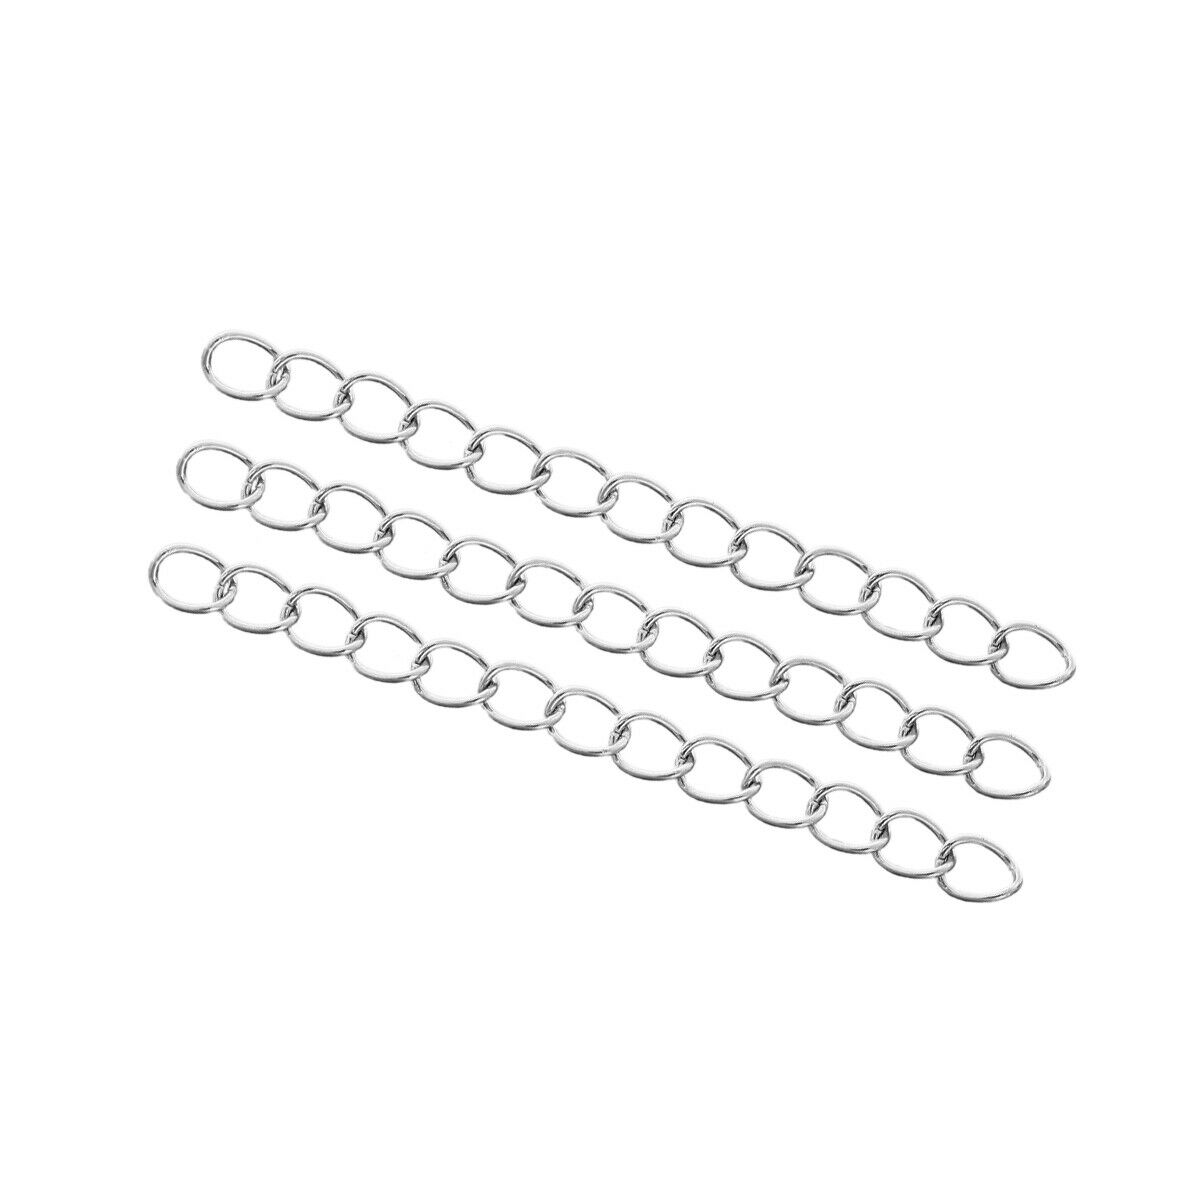 10 Stainless Steel 5cm Extender Chain For Jewelry Necklace Bracelet Silver Tone